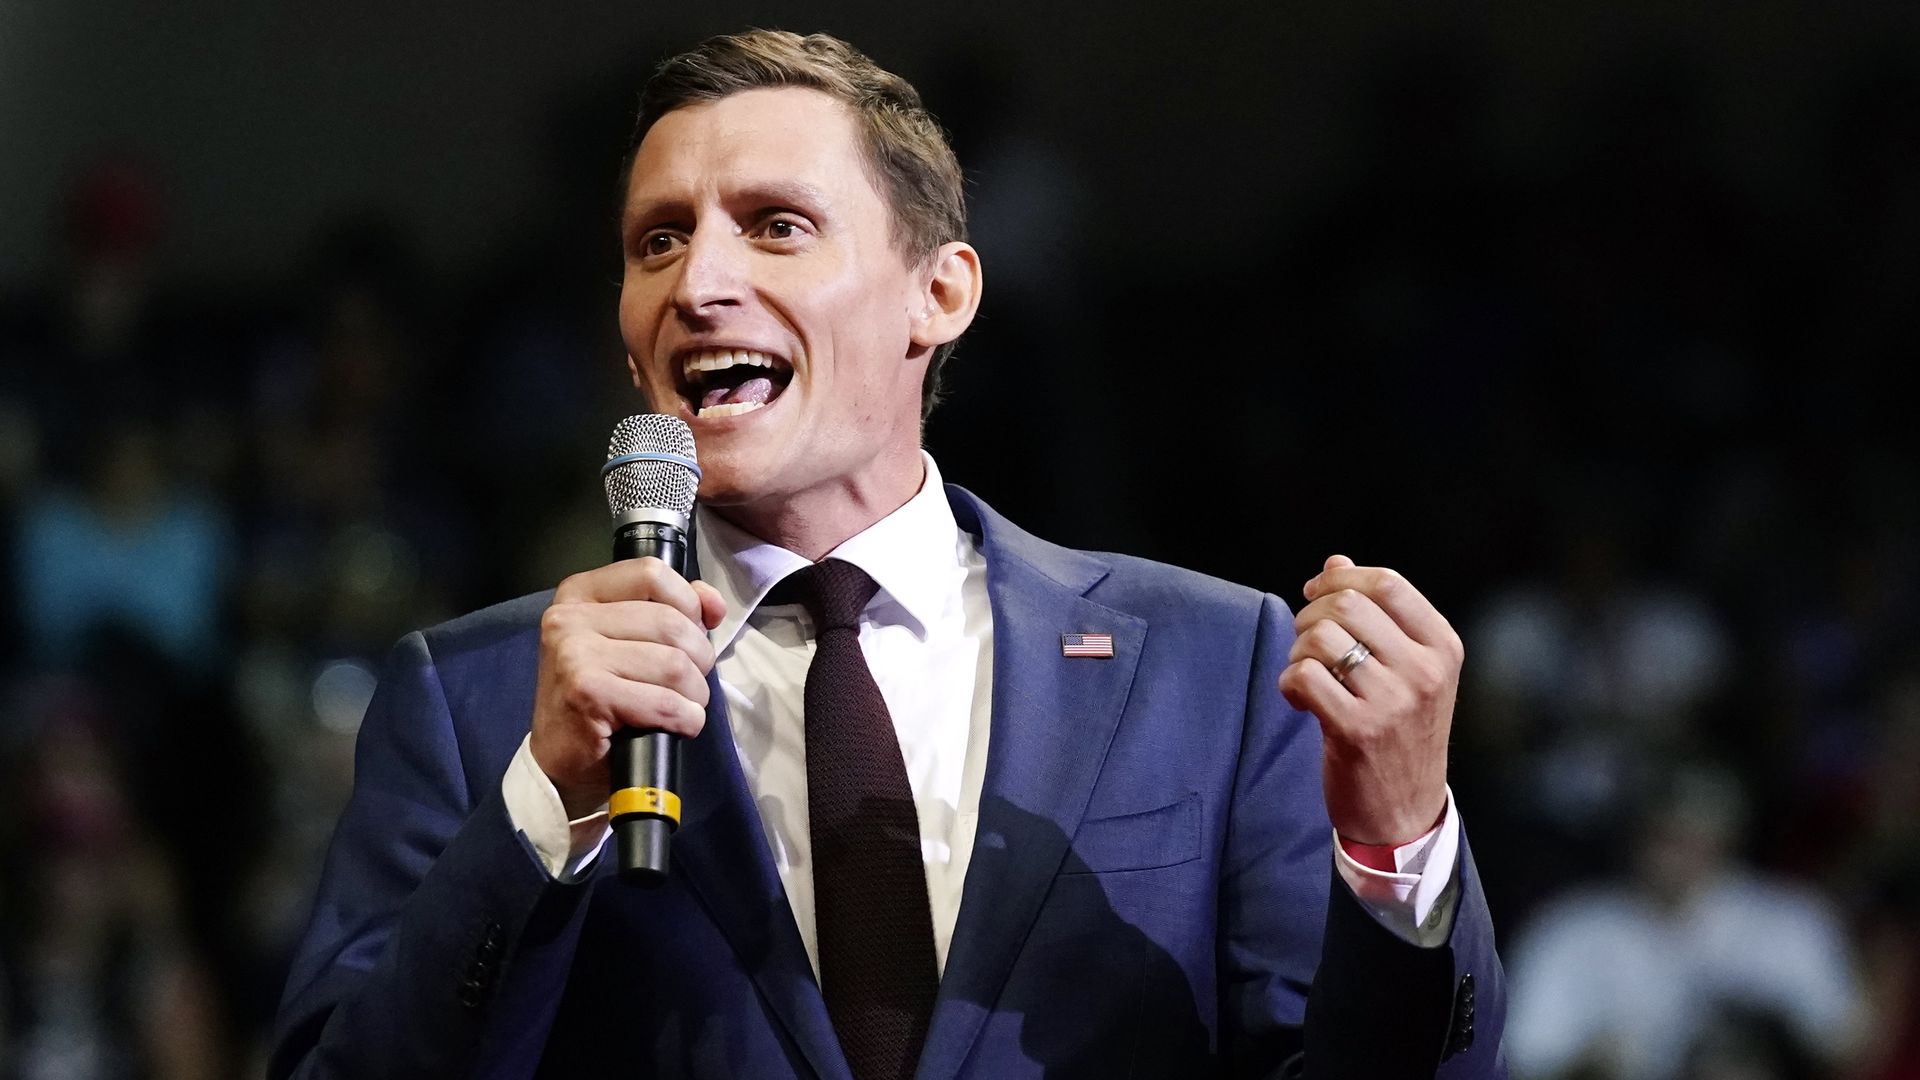 A man in a suit with an American Flag pin speaking into a microphone.